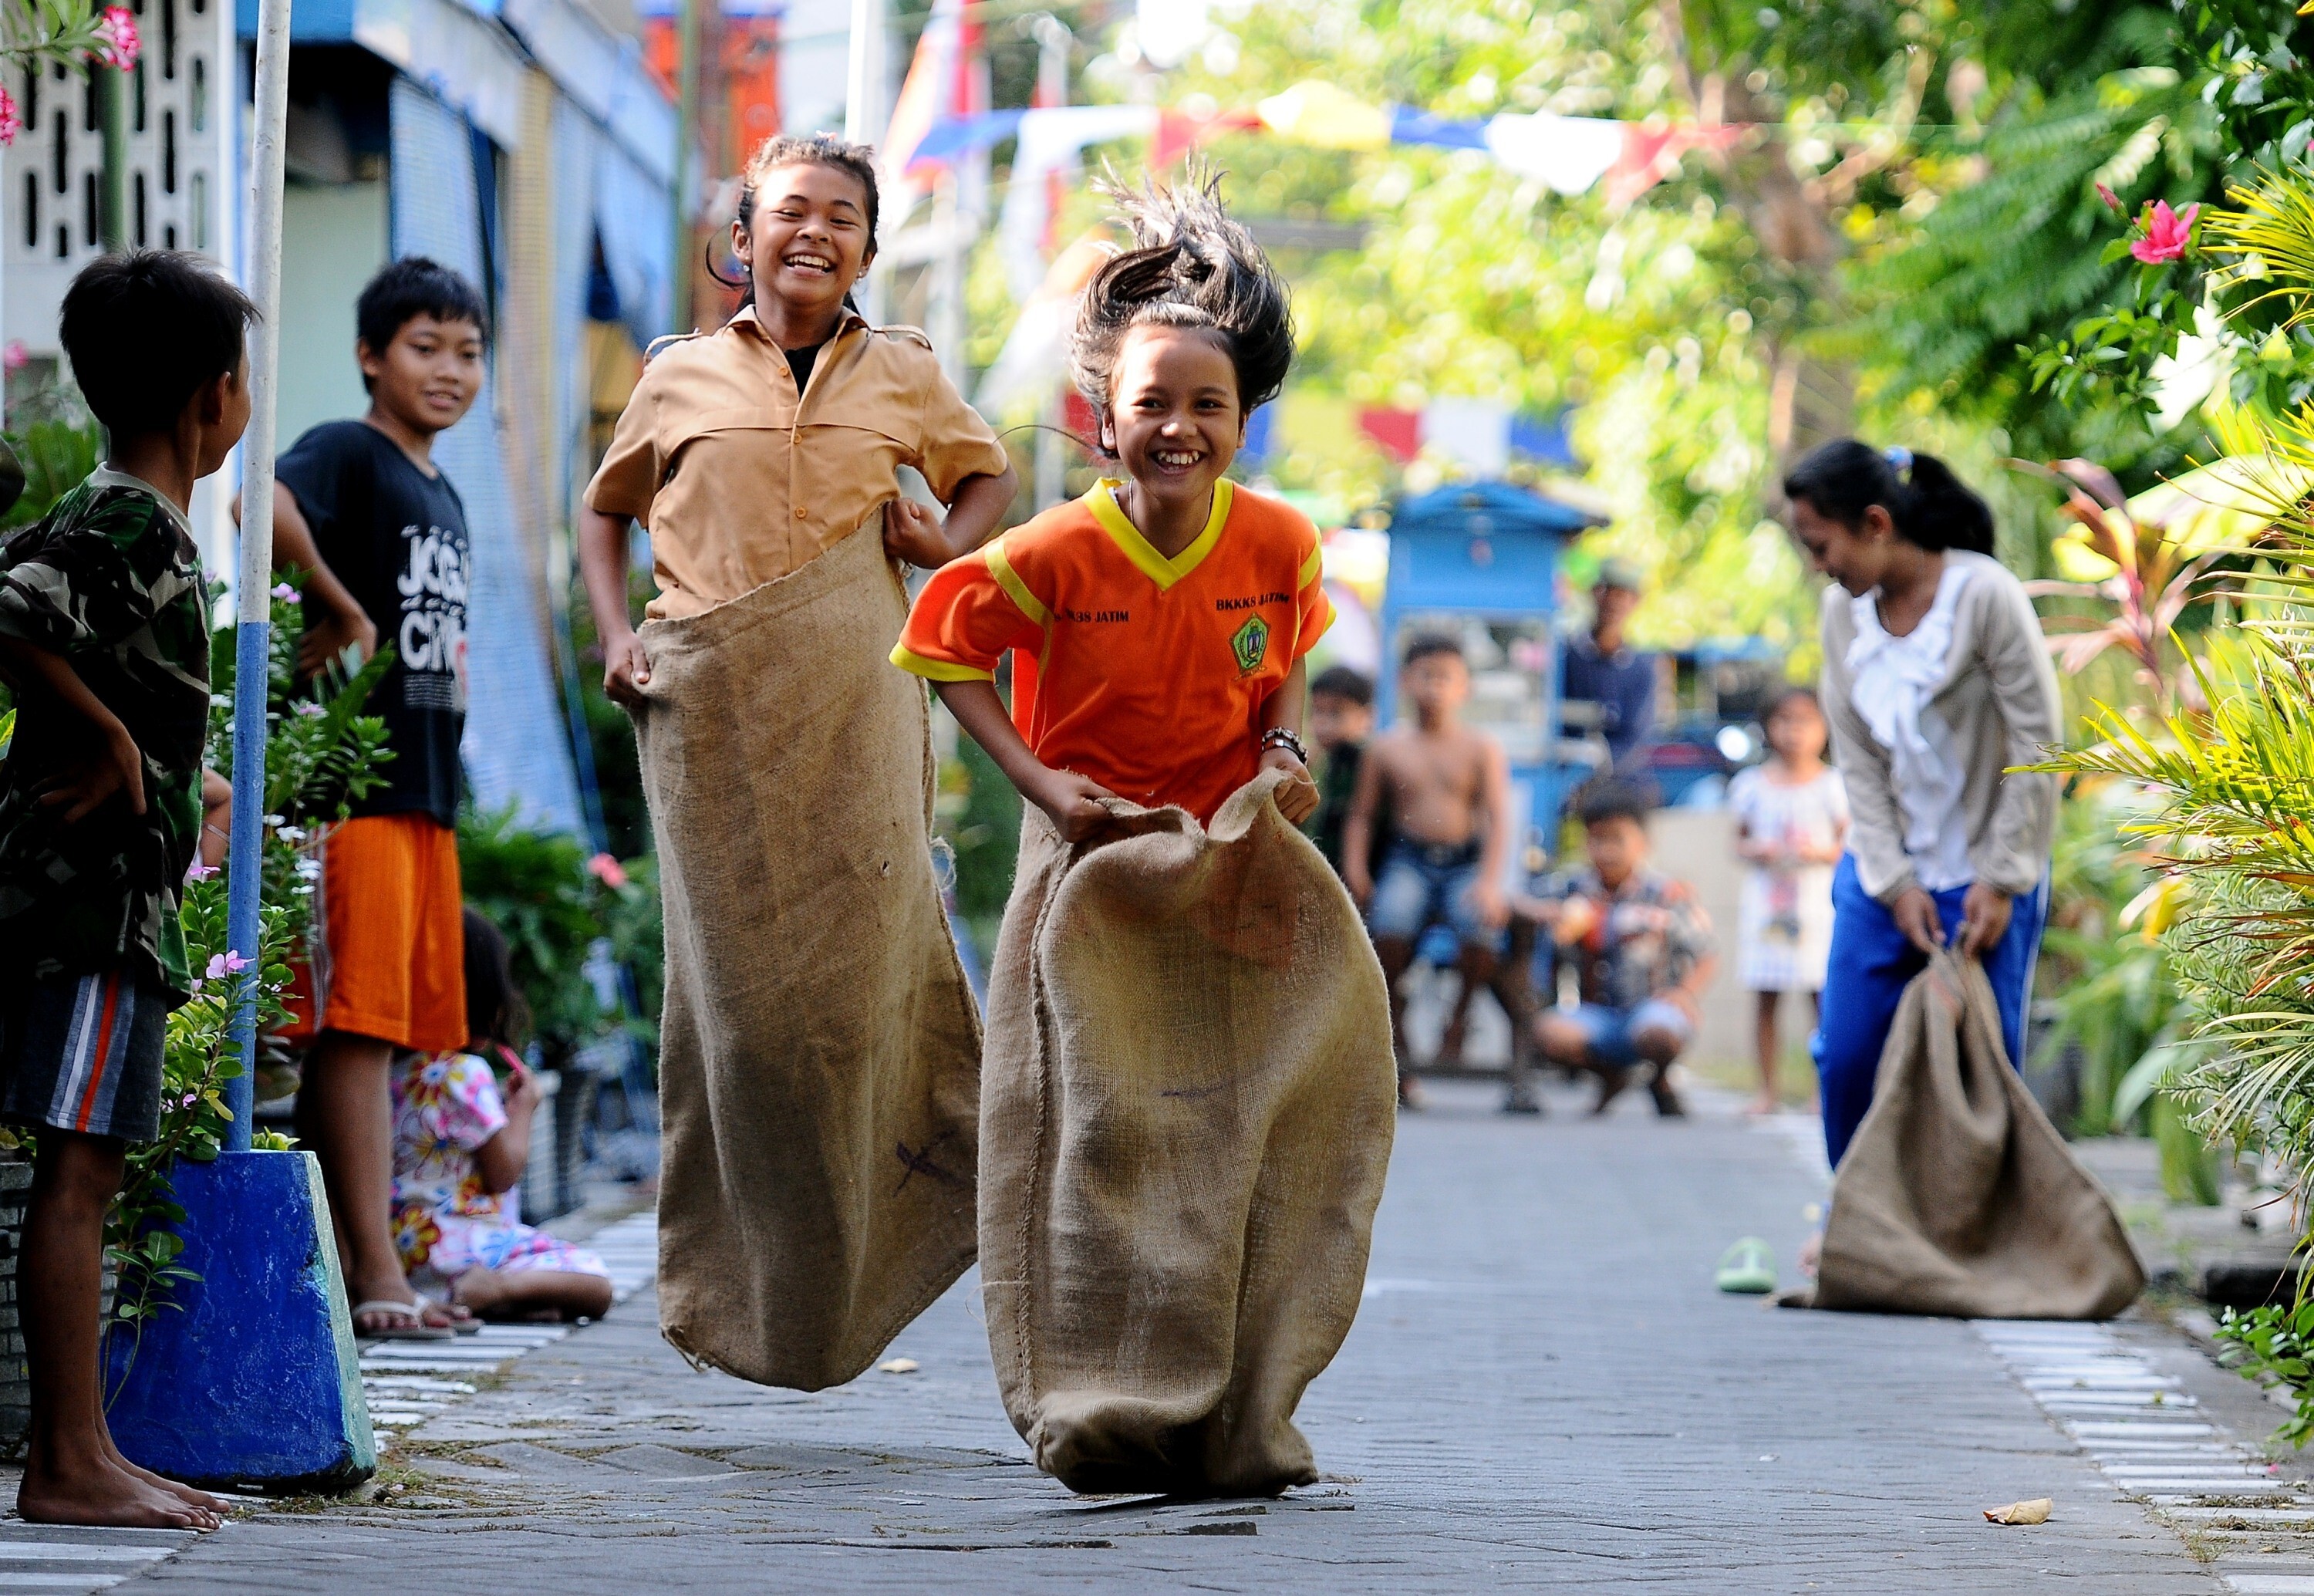 A sack race in Surabaya, Indonesia. Traditional games and toys are having a revival in Indonesia. Photo: Robertus Pudyanto/Getty Images